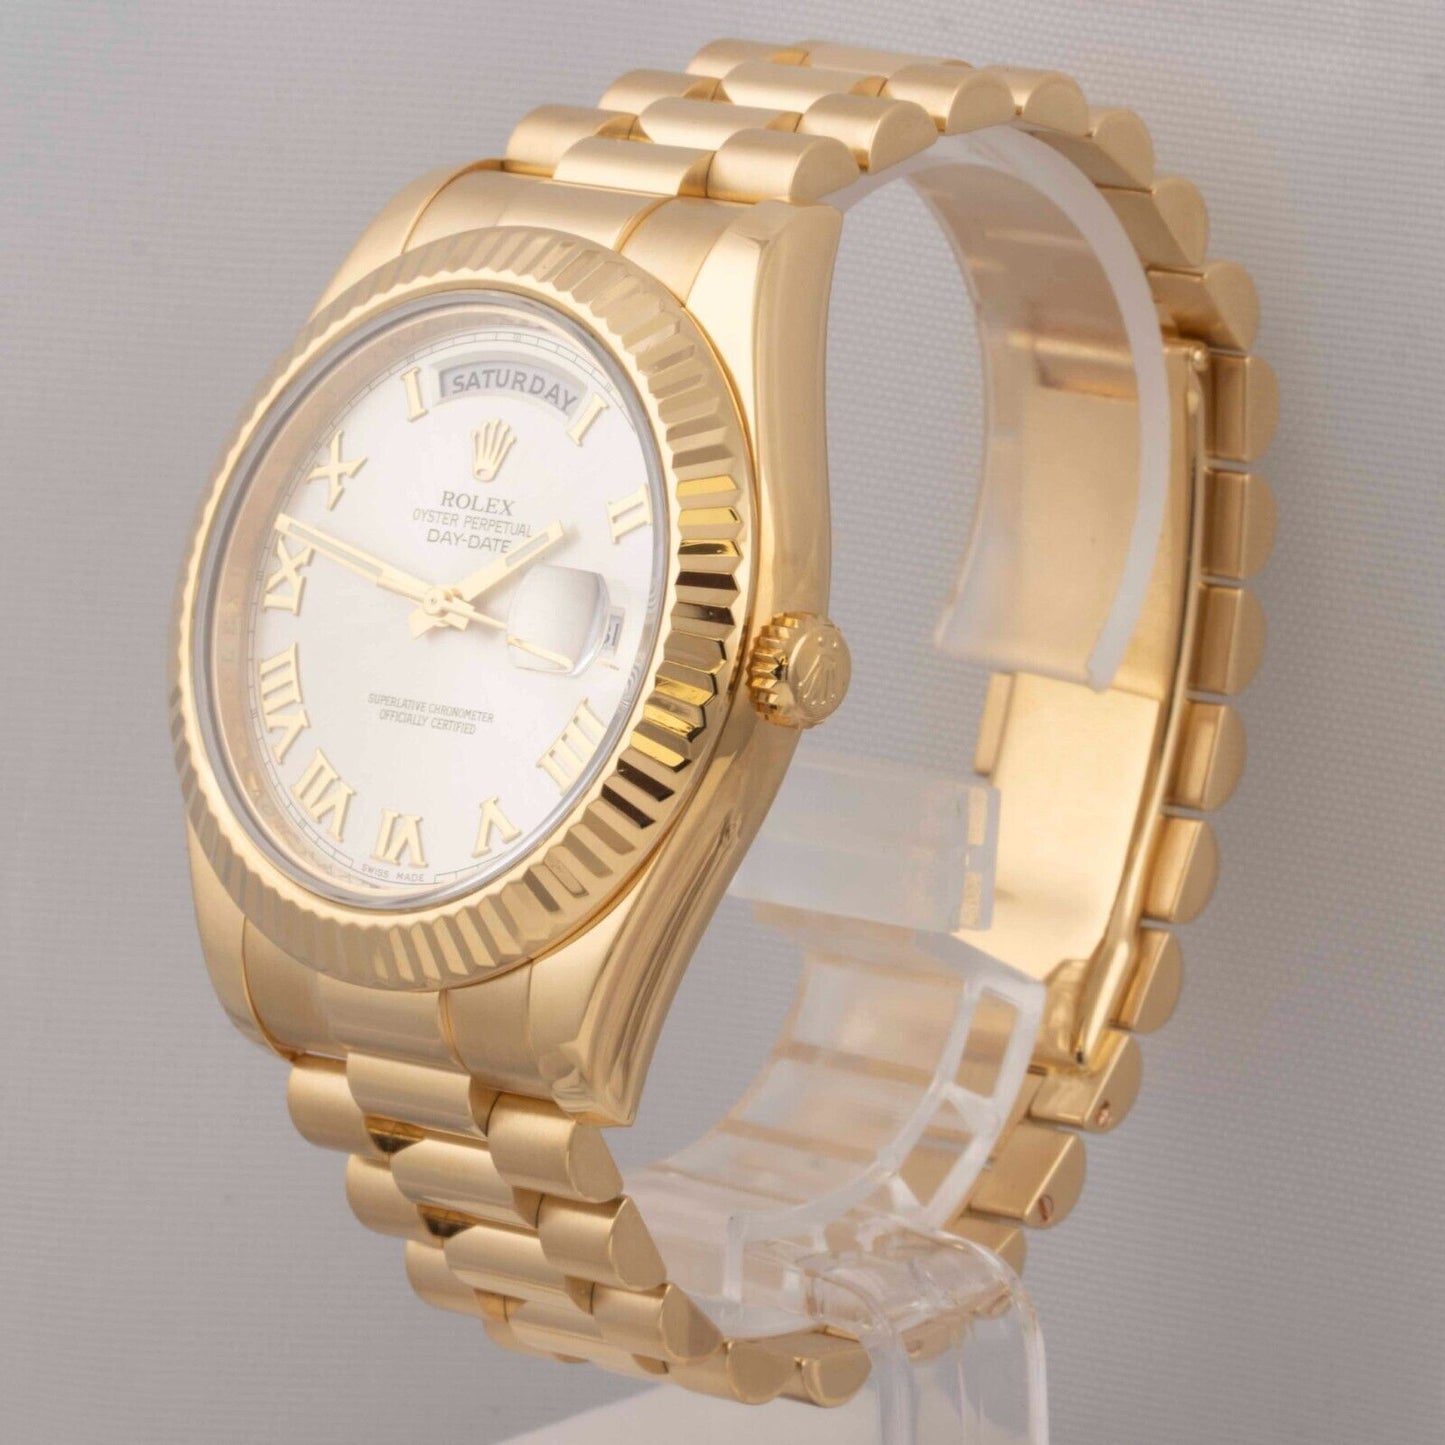 2017 Rolex Day-Date II 18k Yellow Gold Silver Dial 41mm Watch 218238 BOX PAPERS